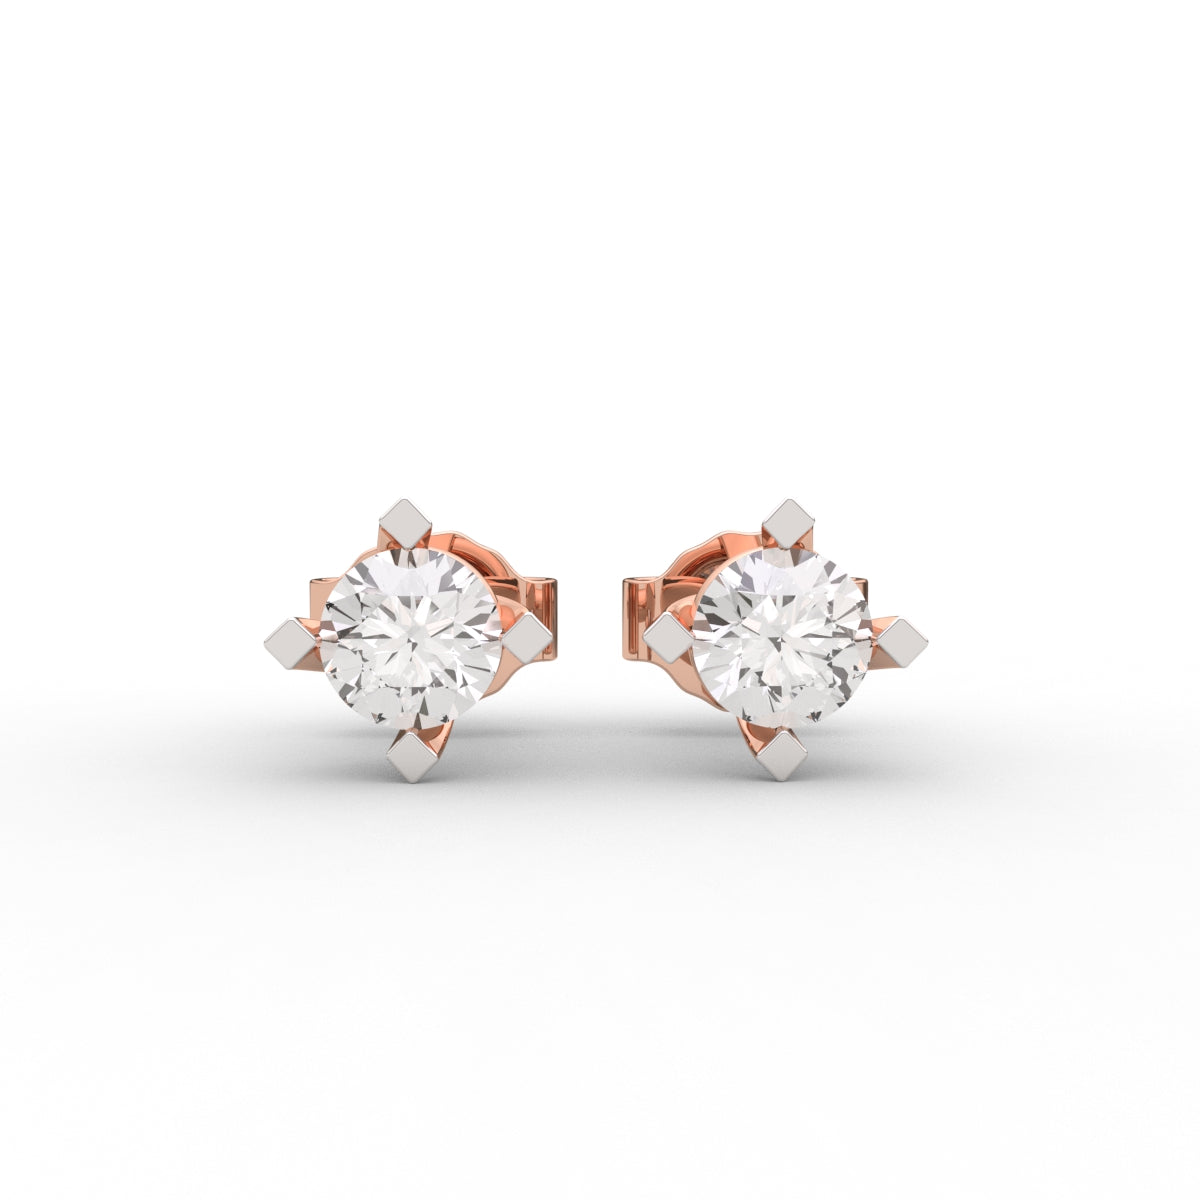 Shimmering solitaire diamond stud